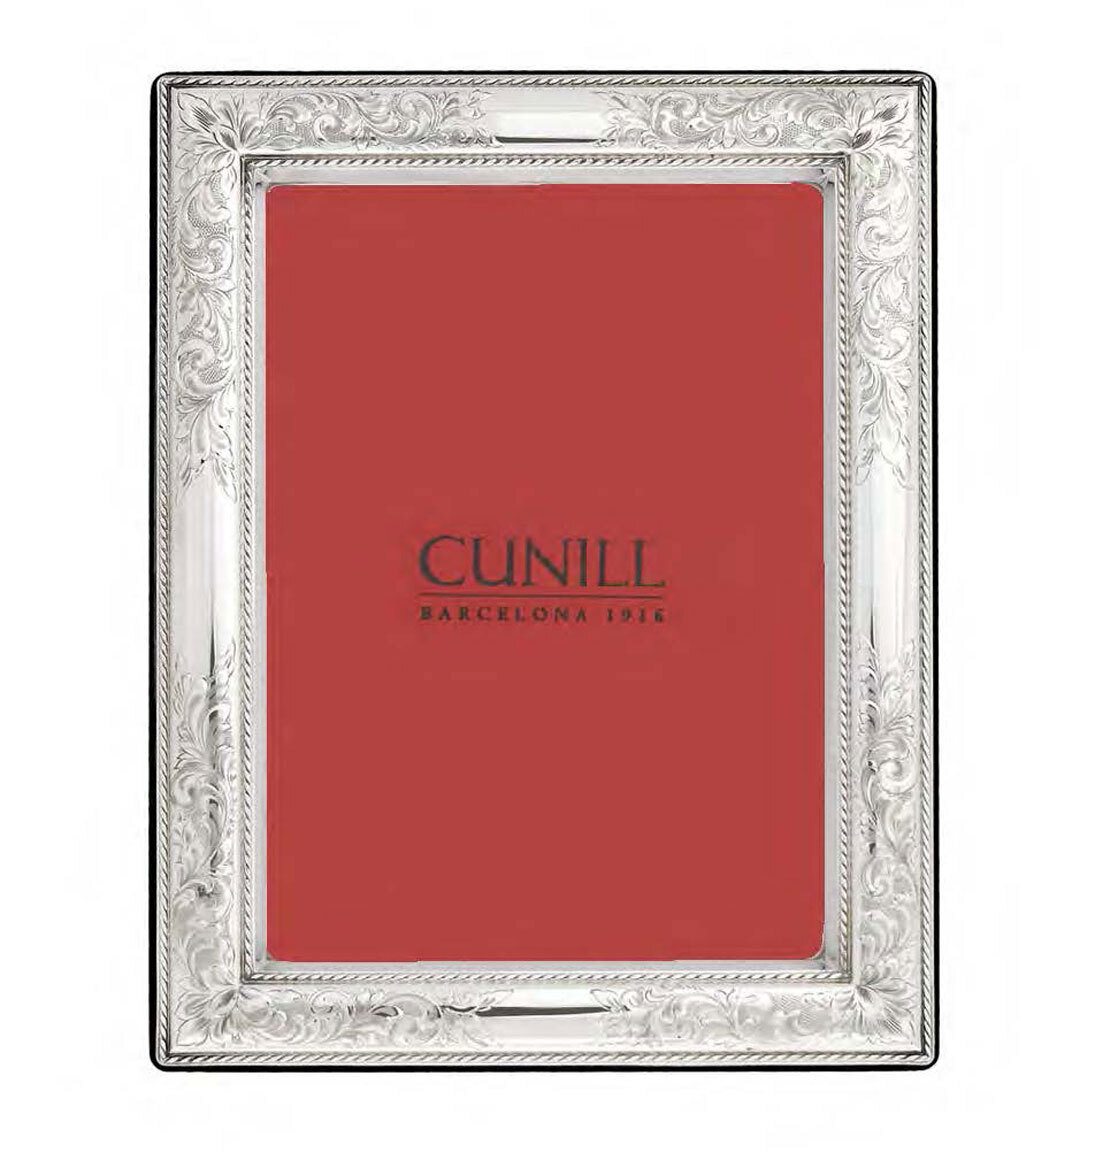 Cunill Vintage 5 x 5 Inch Picture Frame - Sterling Silver